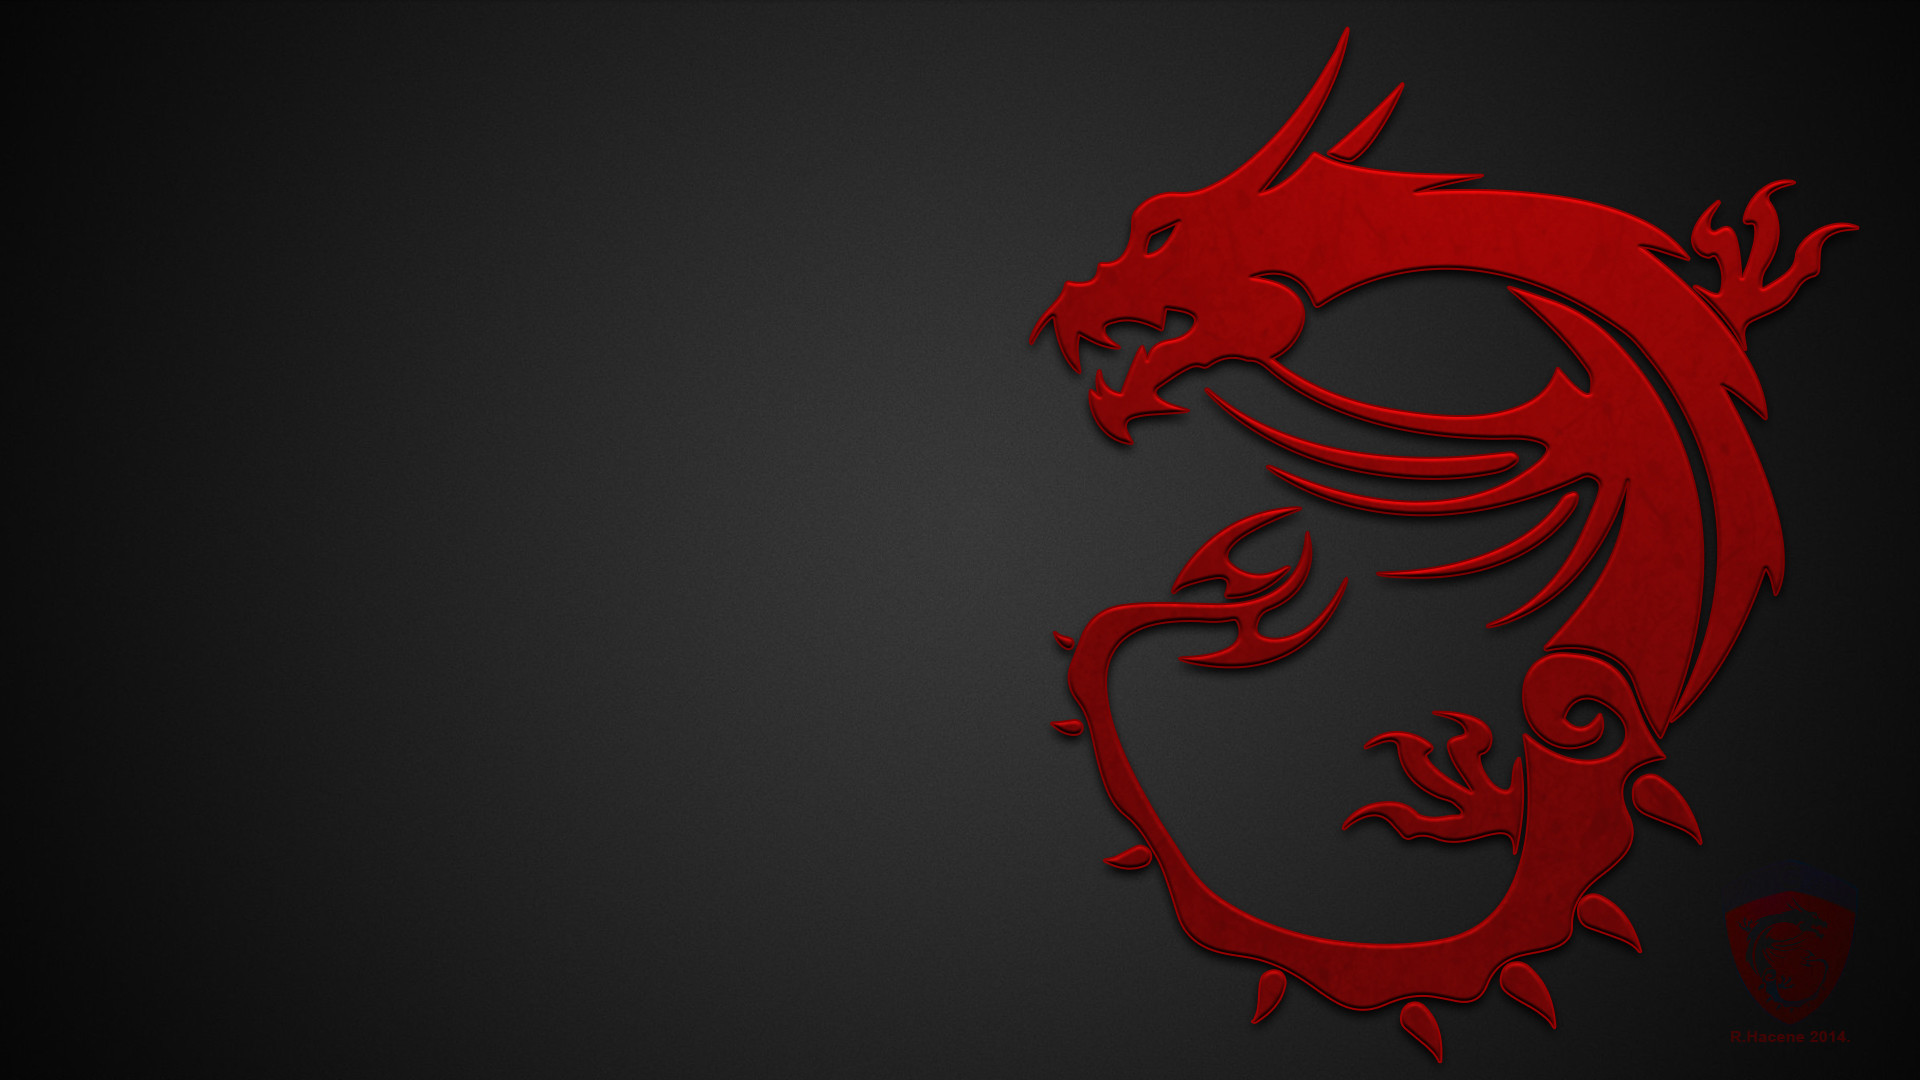 awesome MSI Laptop Background Collections – Set 1